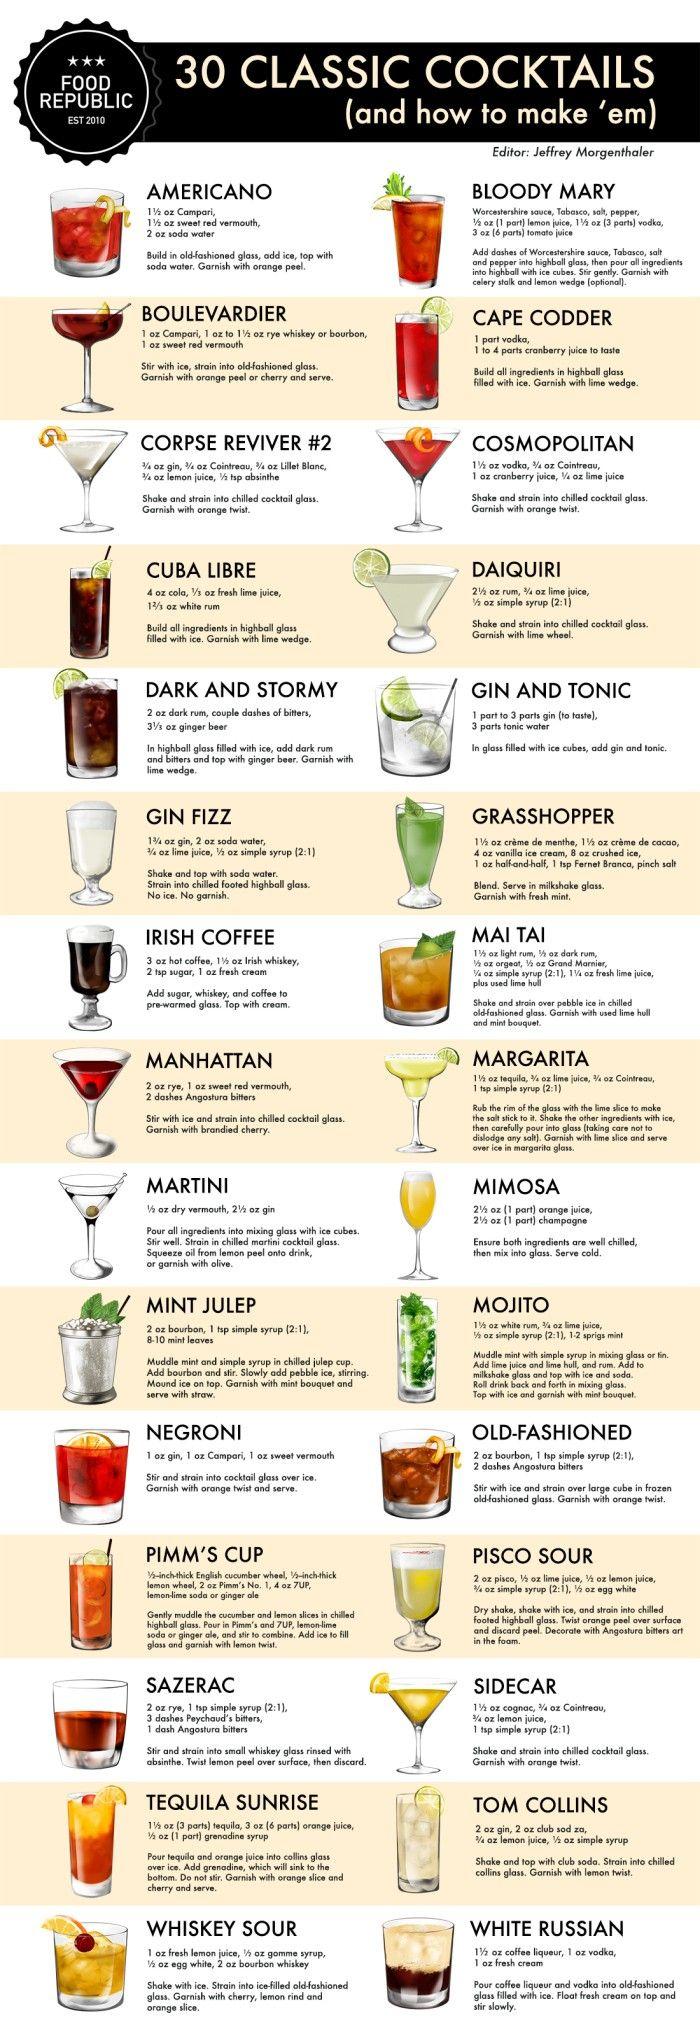 Wedding - How To Make 30 Classic Cocktails: An Illustrated Guide